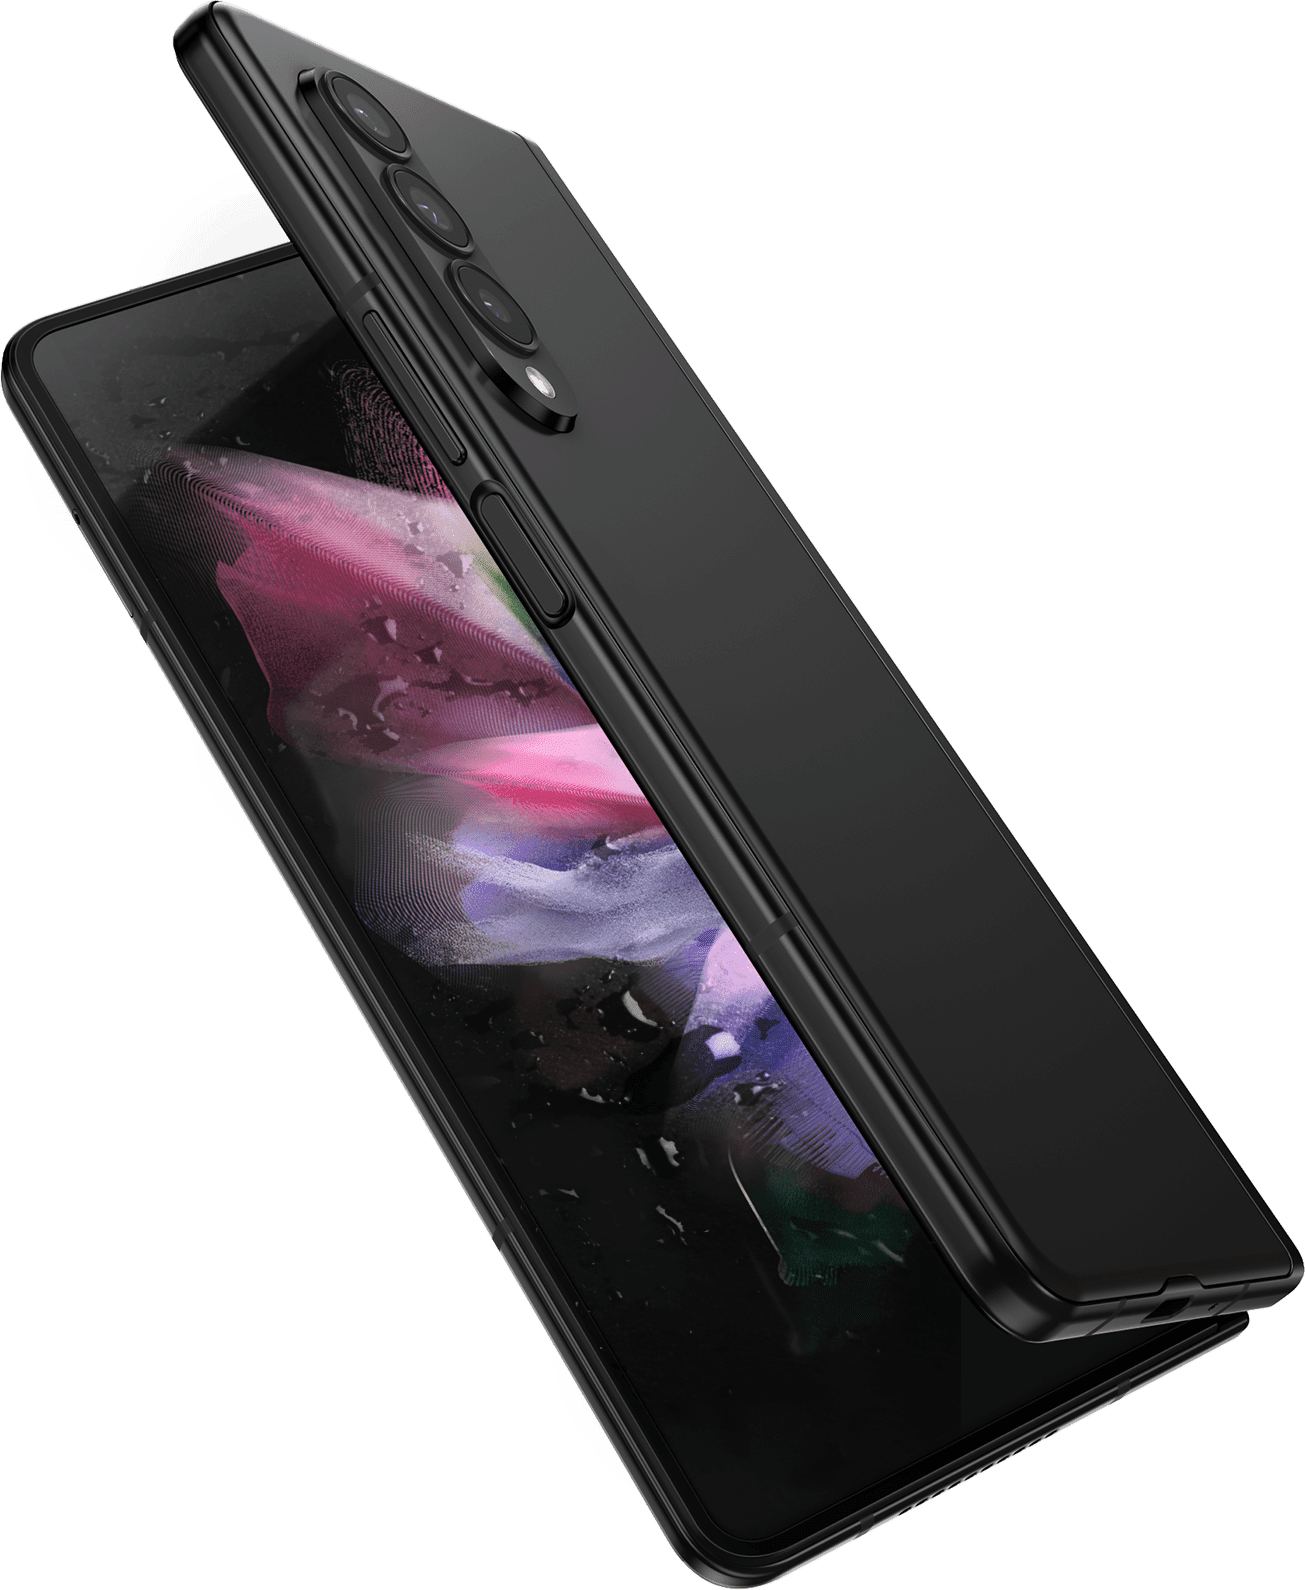 Galaxy Z Fold3 5G partially unfolded and seen from the open side, with a colorful wallpaper on the Main Screen. It is surrounded by a splash of water.